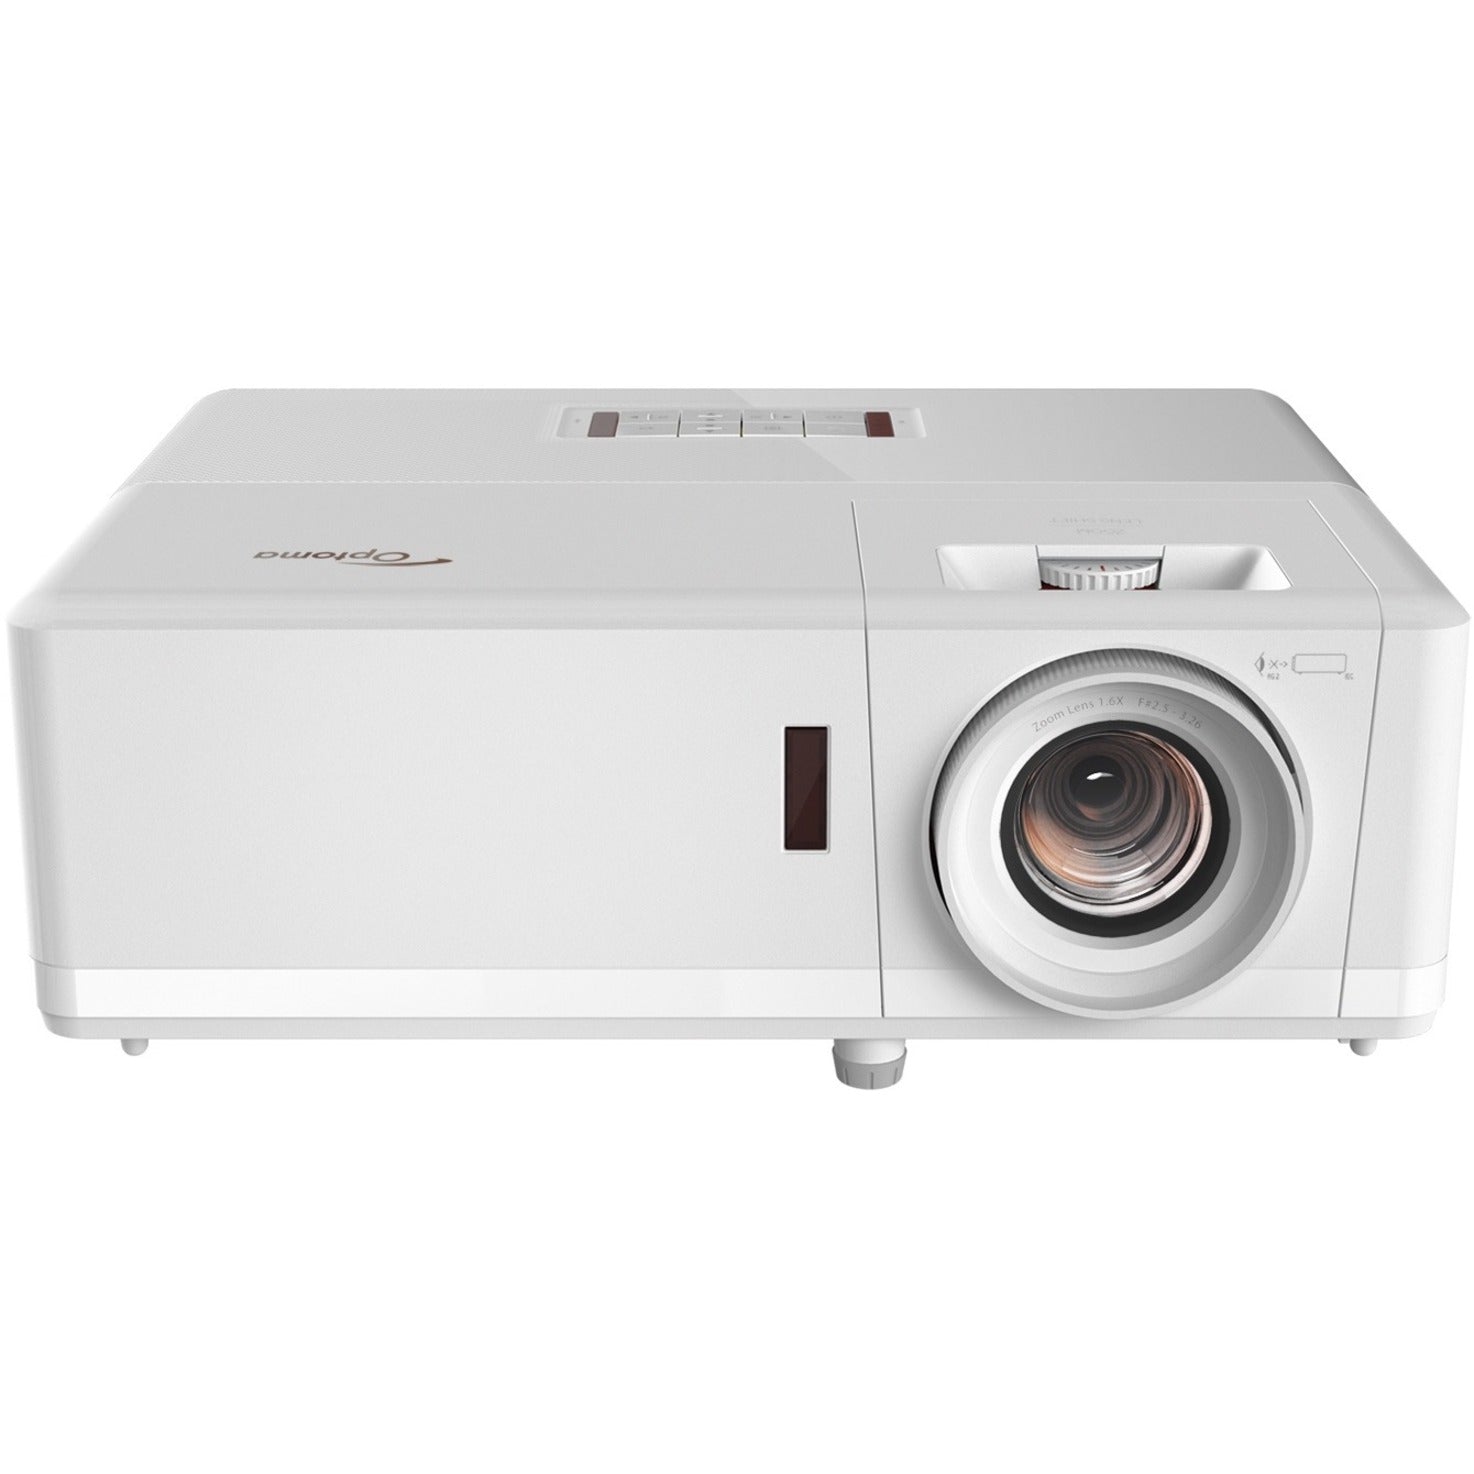 Optoma UHZ50 3D DLP Projector - 4K UHD, 3000 lm, Laser Lamp, Home Entertainment [Discontinued]